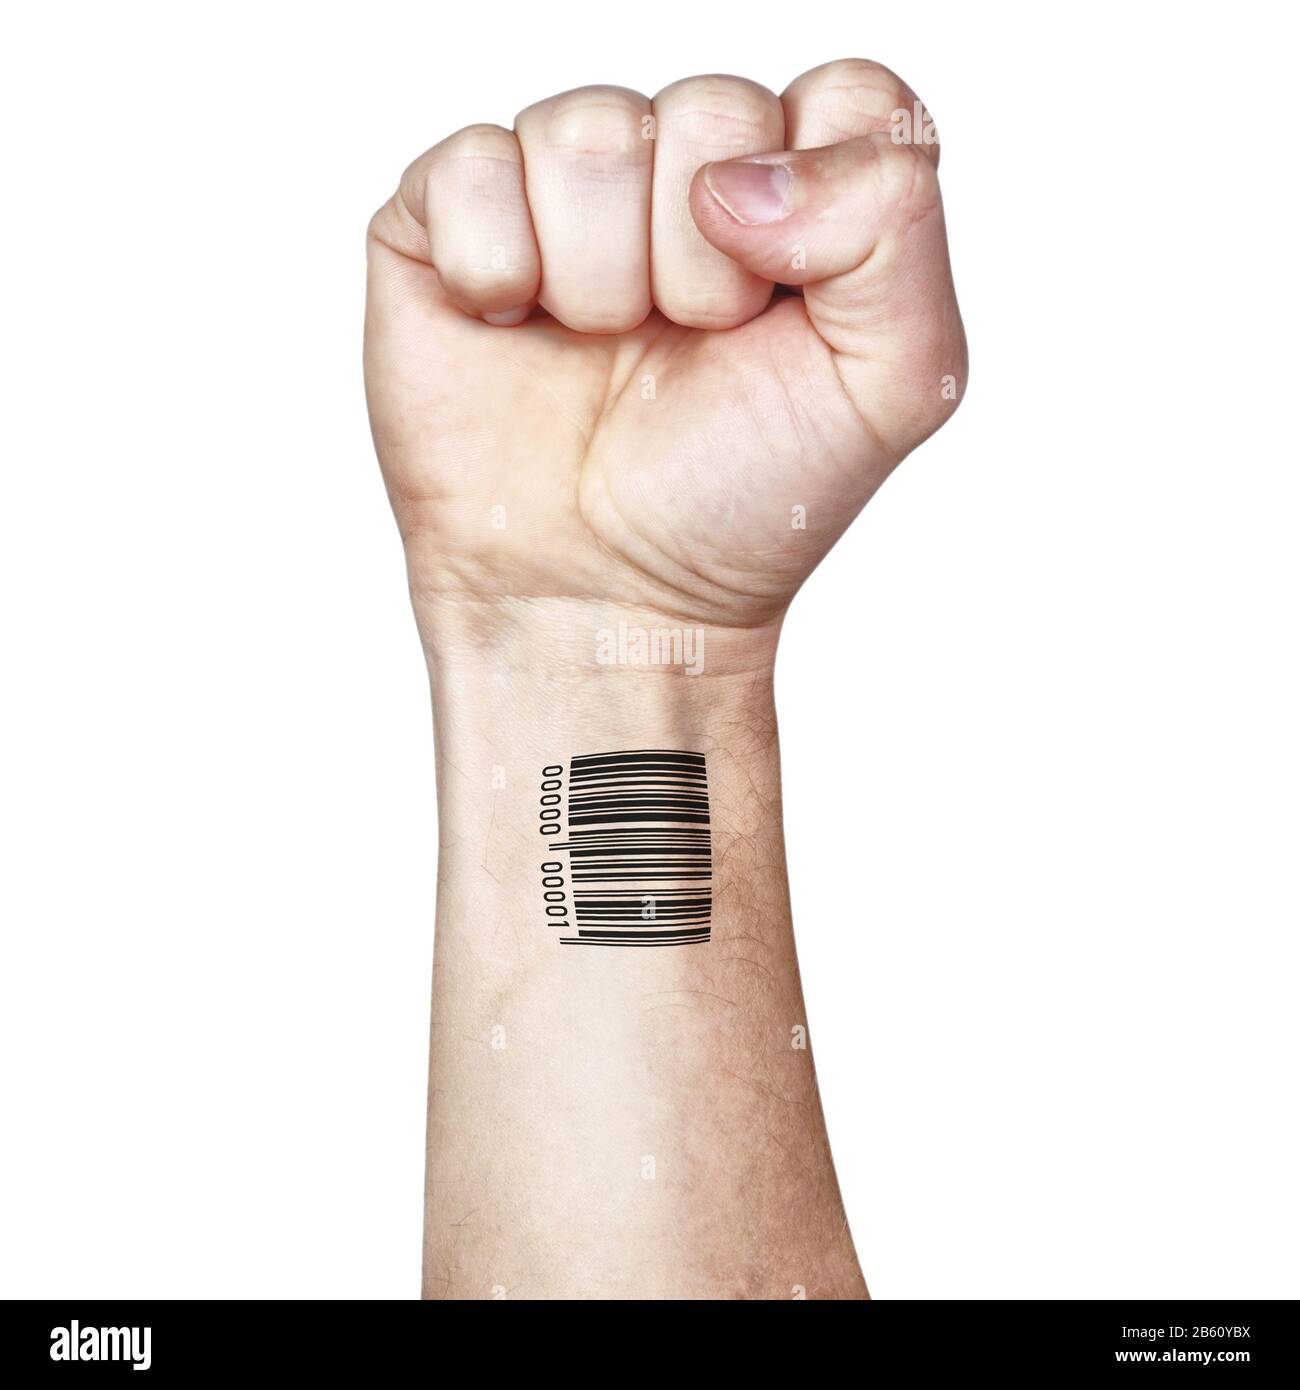 All Things About Barcode Tattoo: meaning & design - CNC Tattoo Machine  Supply